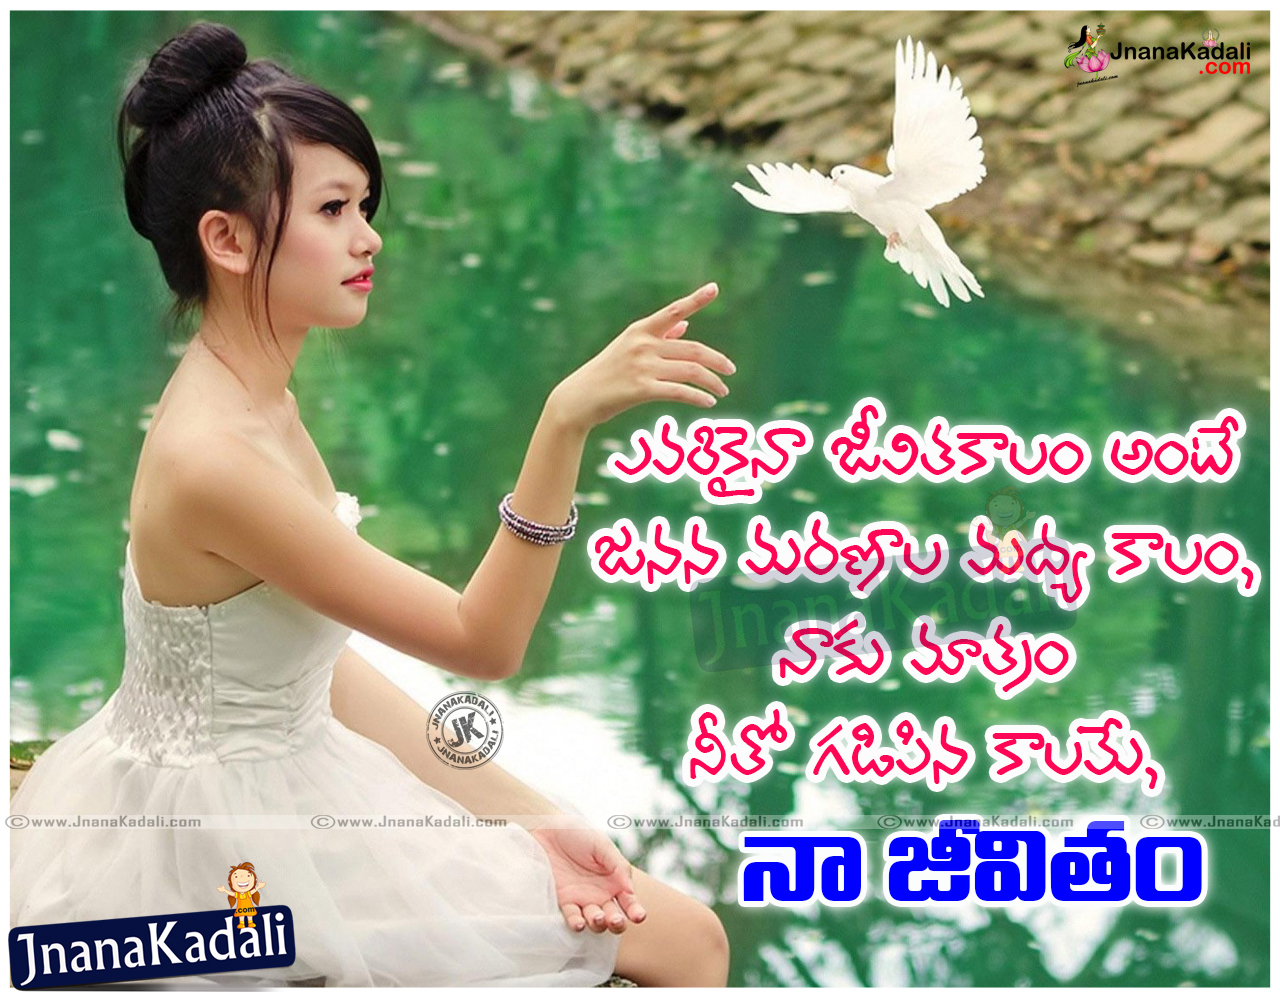 Telugu Wonderful Love Meaning Quotations and Nice Poems in Telugu ...